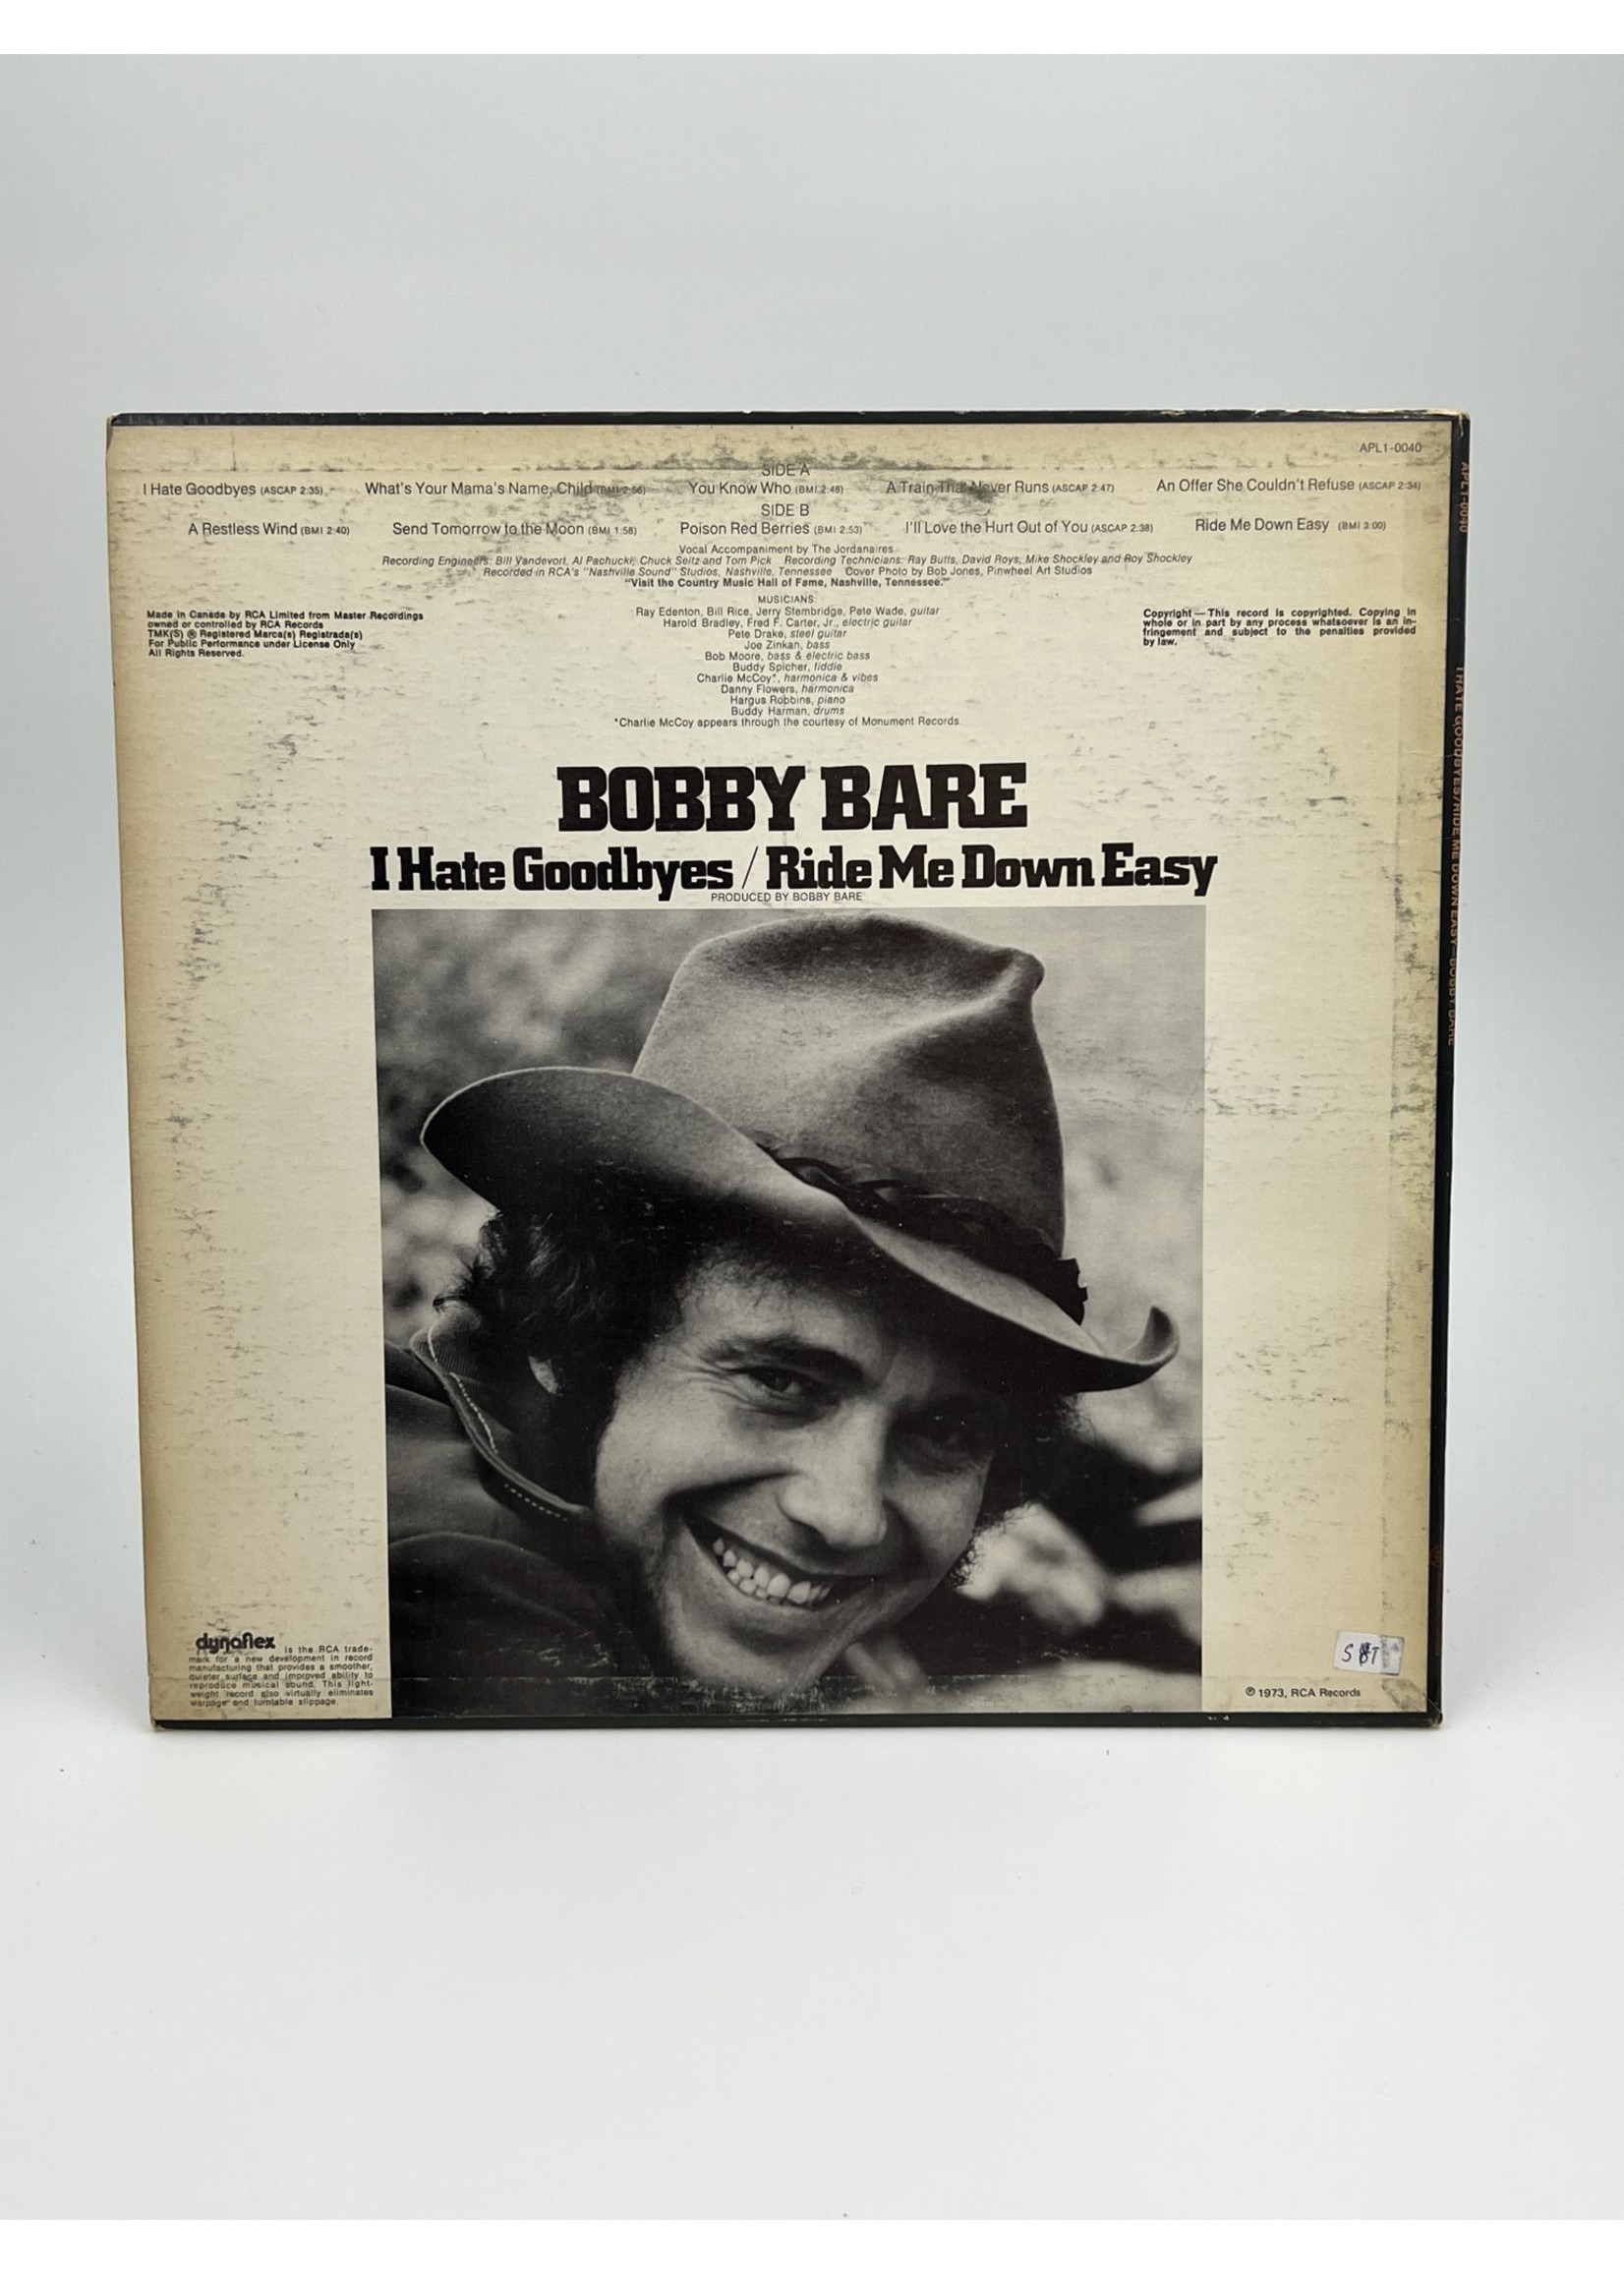 LP Bobby Bare I Hate Goodbyes Ride Me Down Easy LP Record